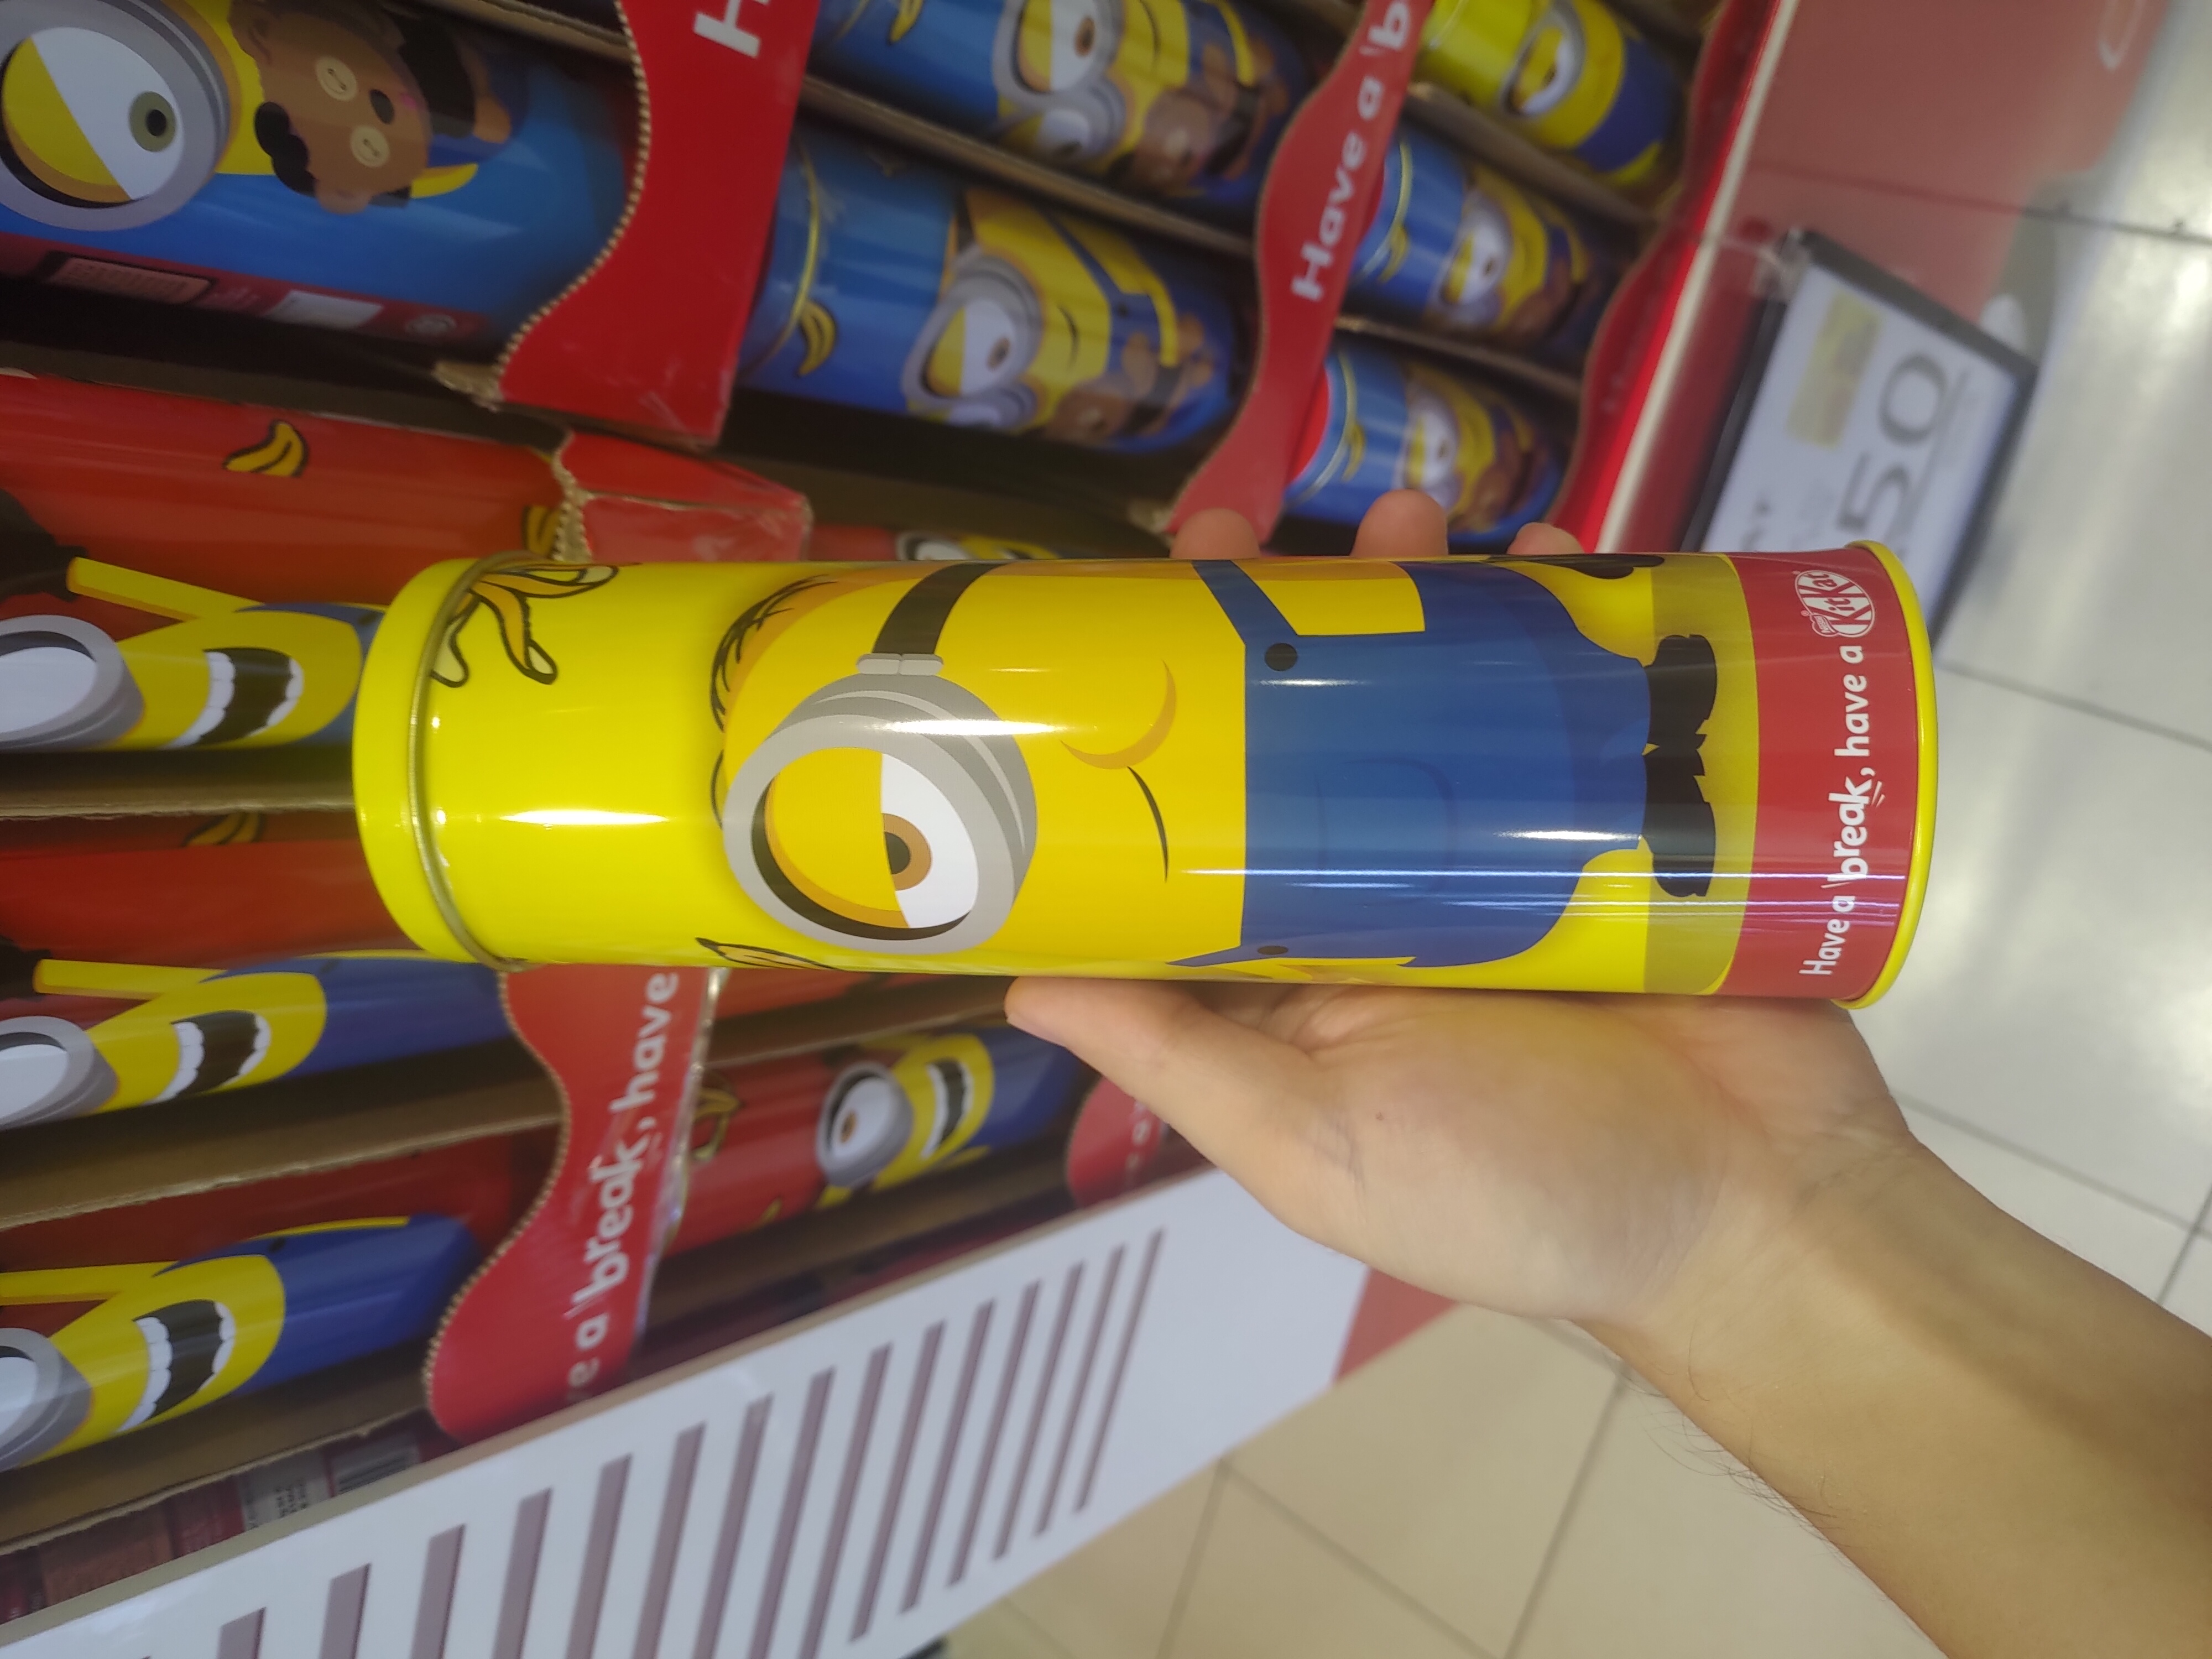 Free Limited Edition Minion Cooler Bag when you purchase Kit Kat at FairPrice - 10